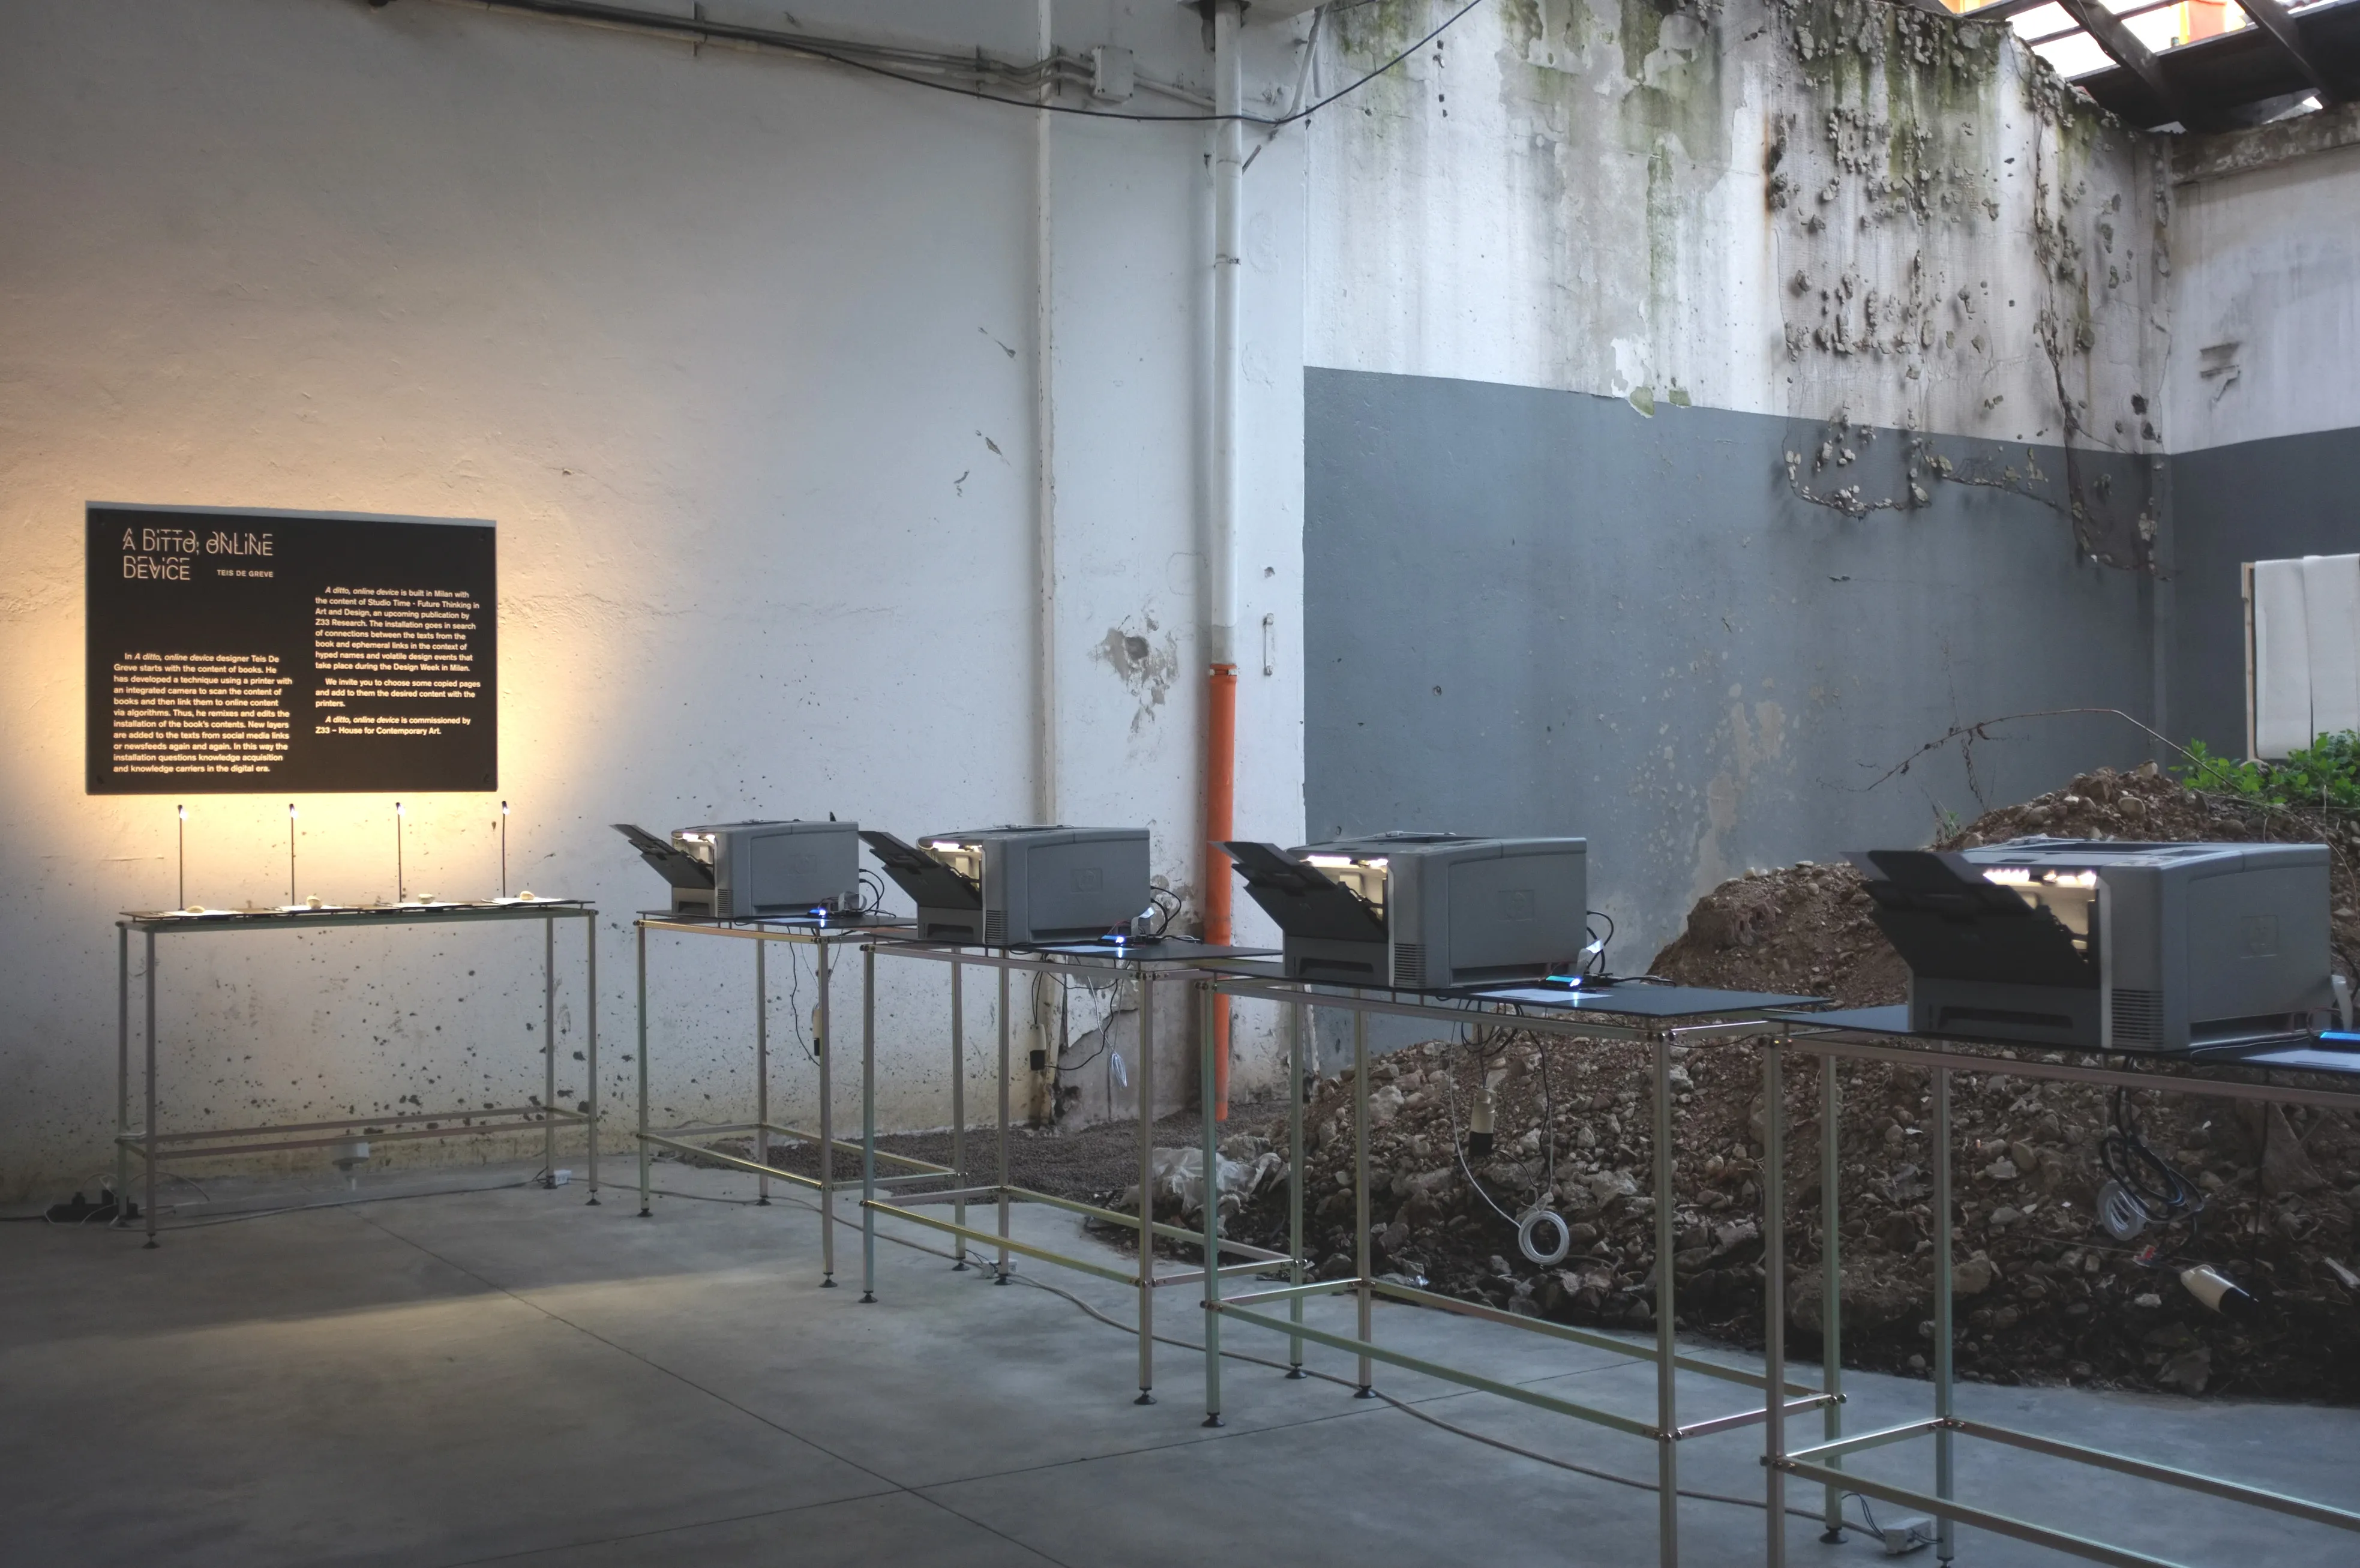 Exhibition view of the installation